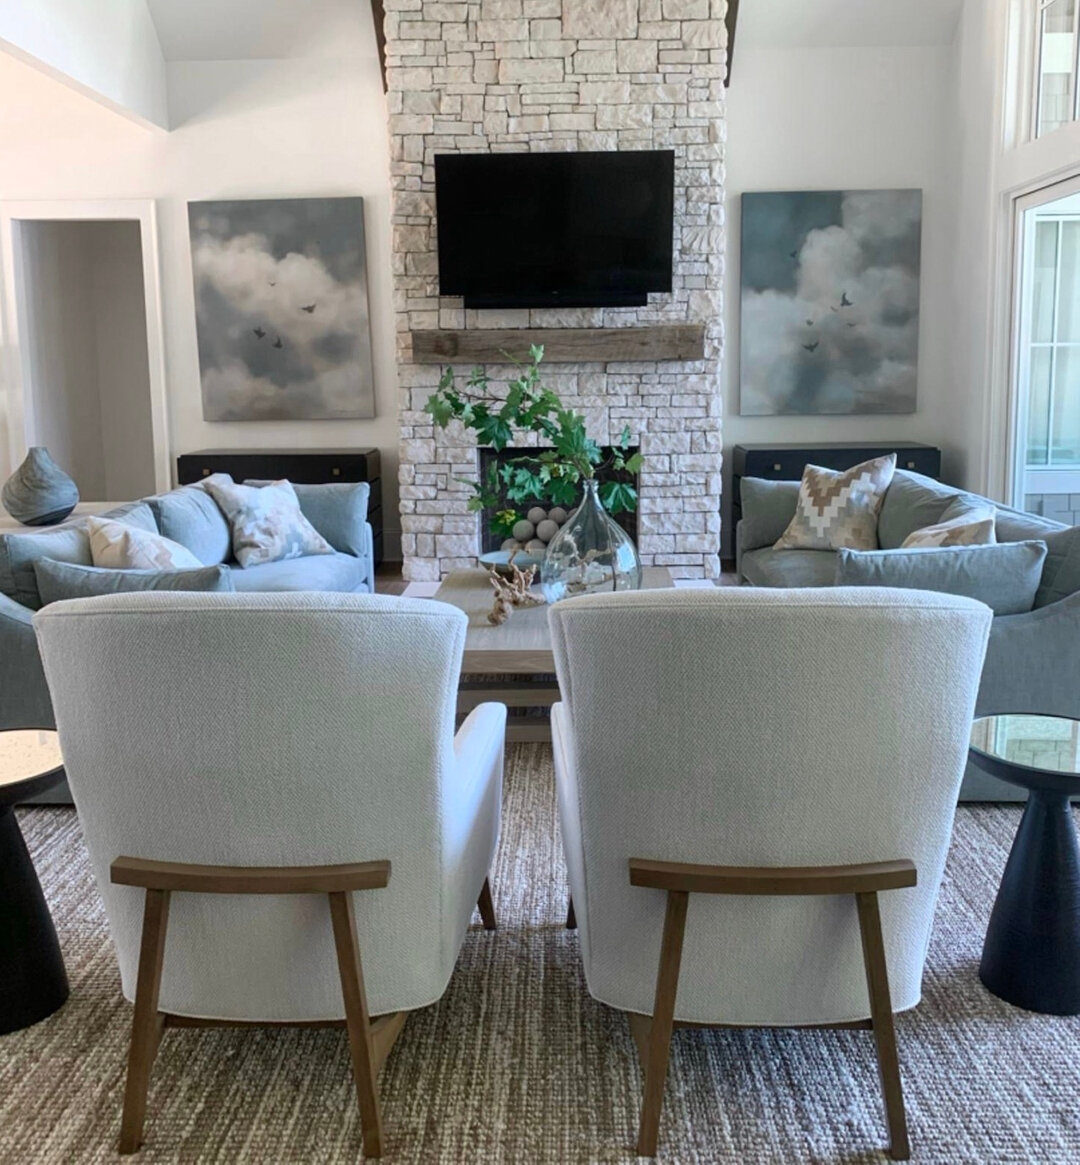 One that looks good from the front... AND the back 🤩​​​​​​​​
_____________________ ​​​​​​​​
​​​​​​​​
#alisonbakerinteriordesign #abid #atlantainteriordesign #interiordesign #homedesign #interior #interiors #designers #designerlife